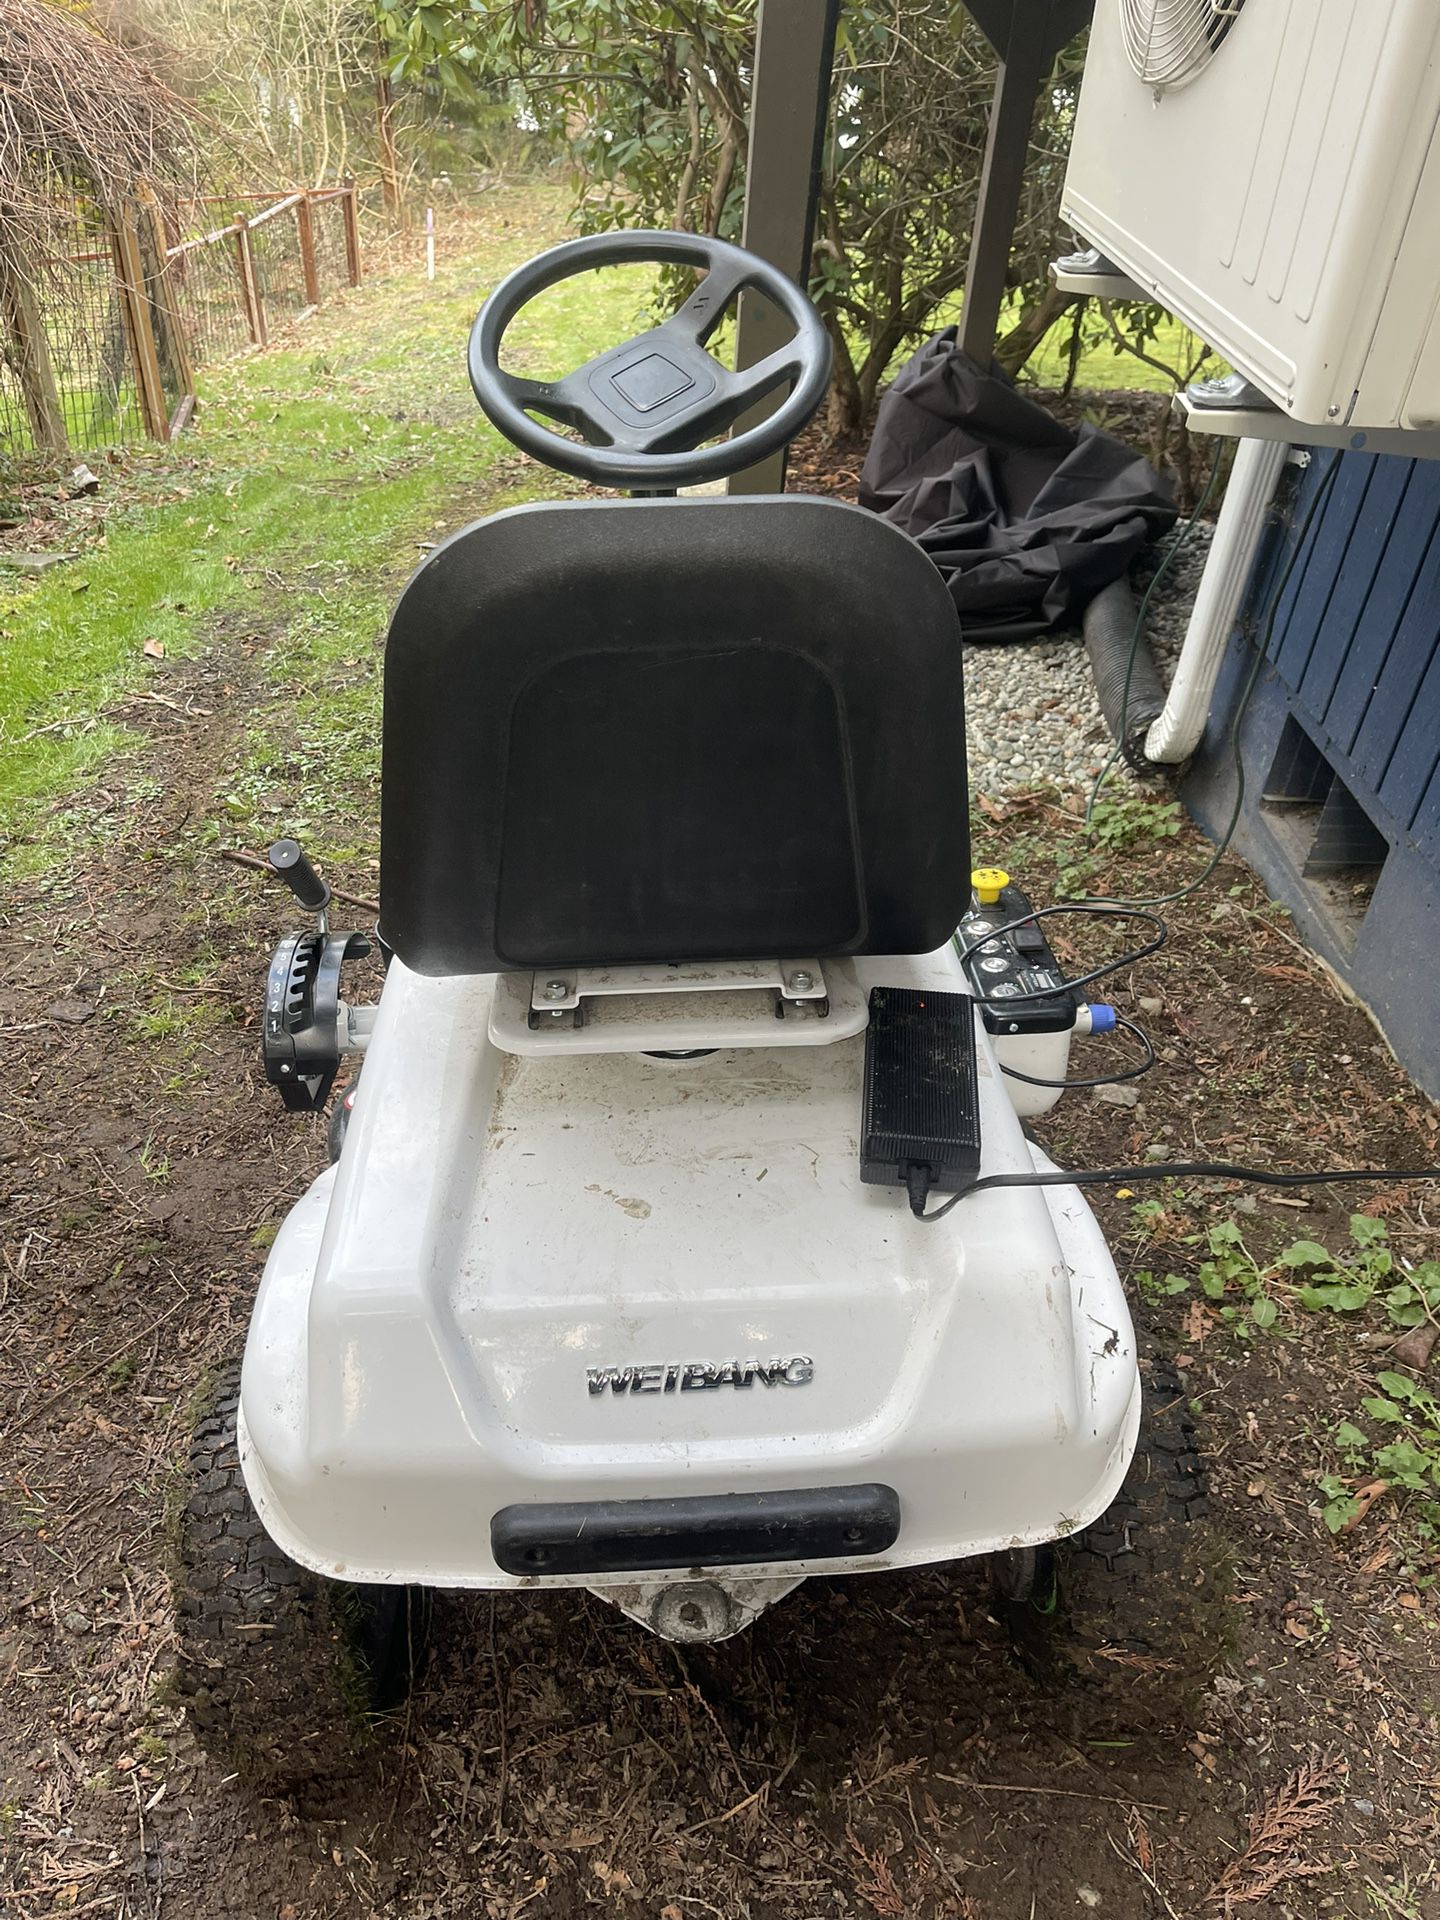 ELECTRIC RIDING MOWER - WEIBANG LITHIUM-ION E-RIDER 